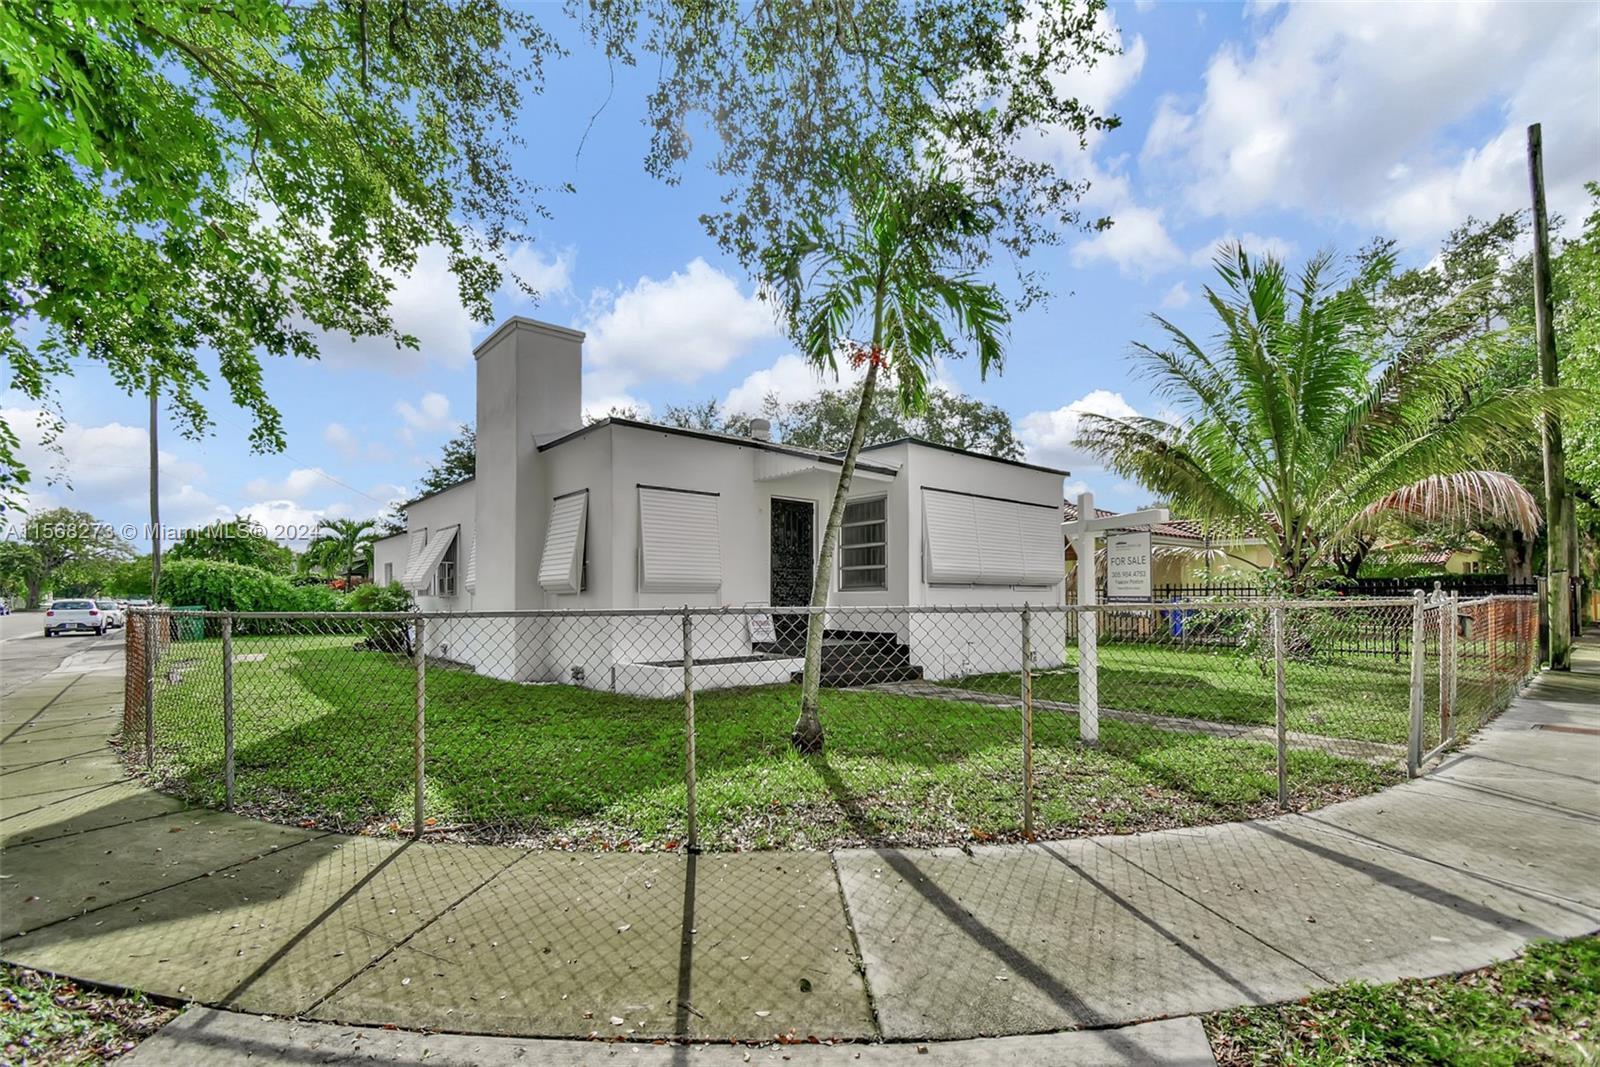 Photo of 4921 NW 6th Ave in Miami, FL